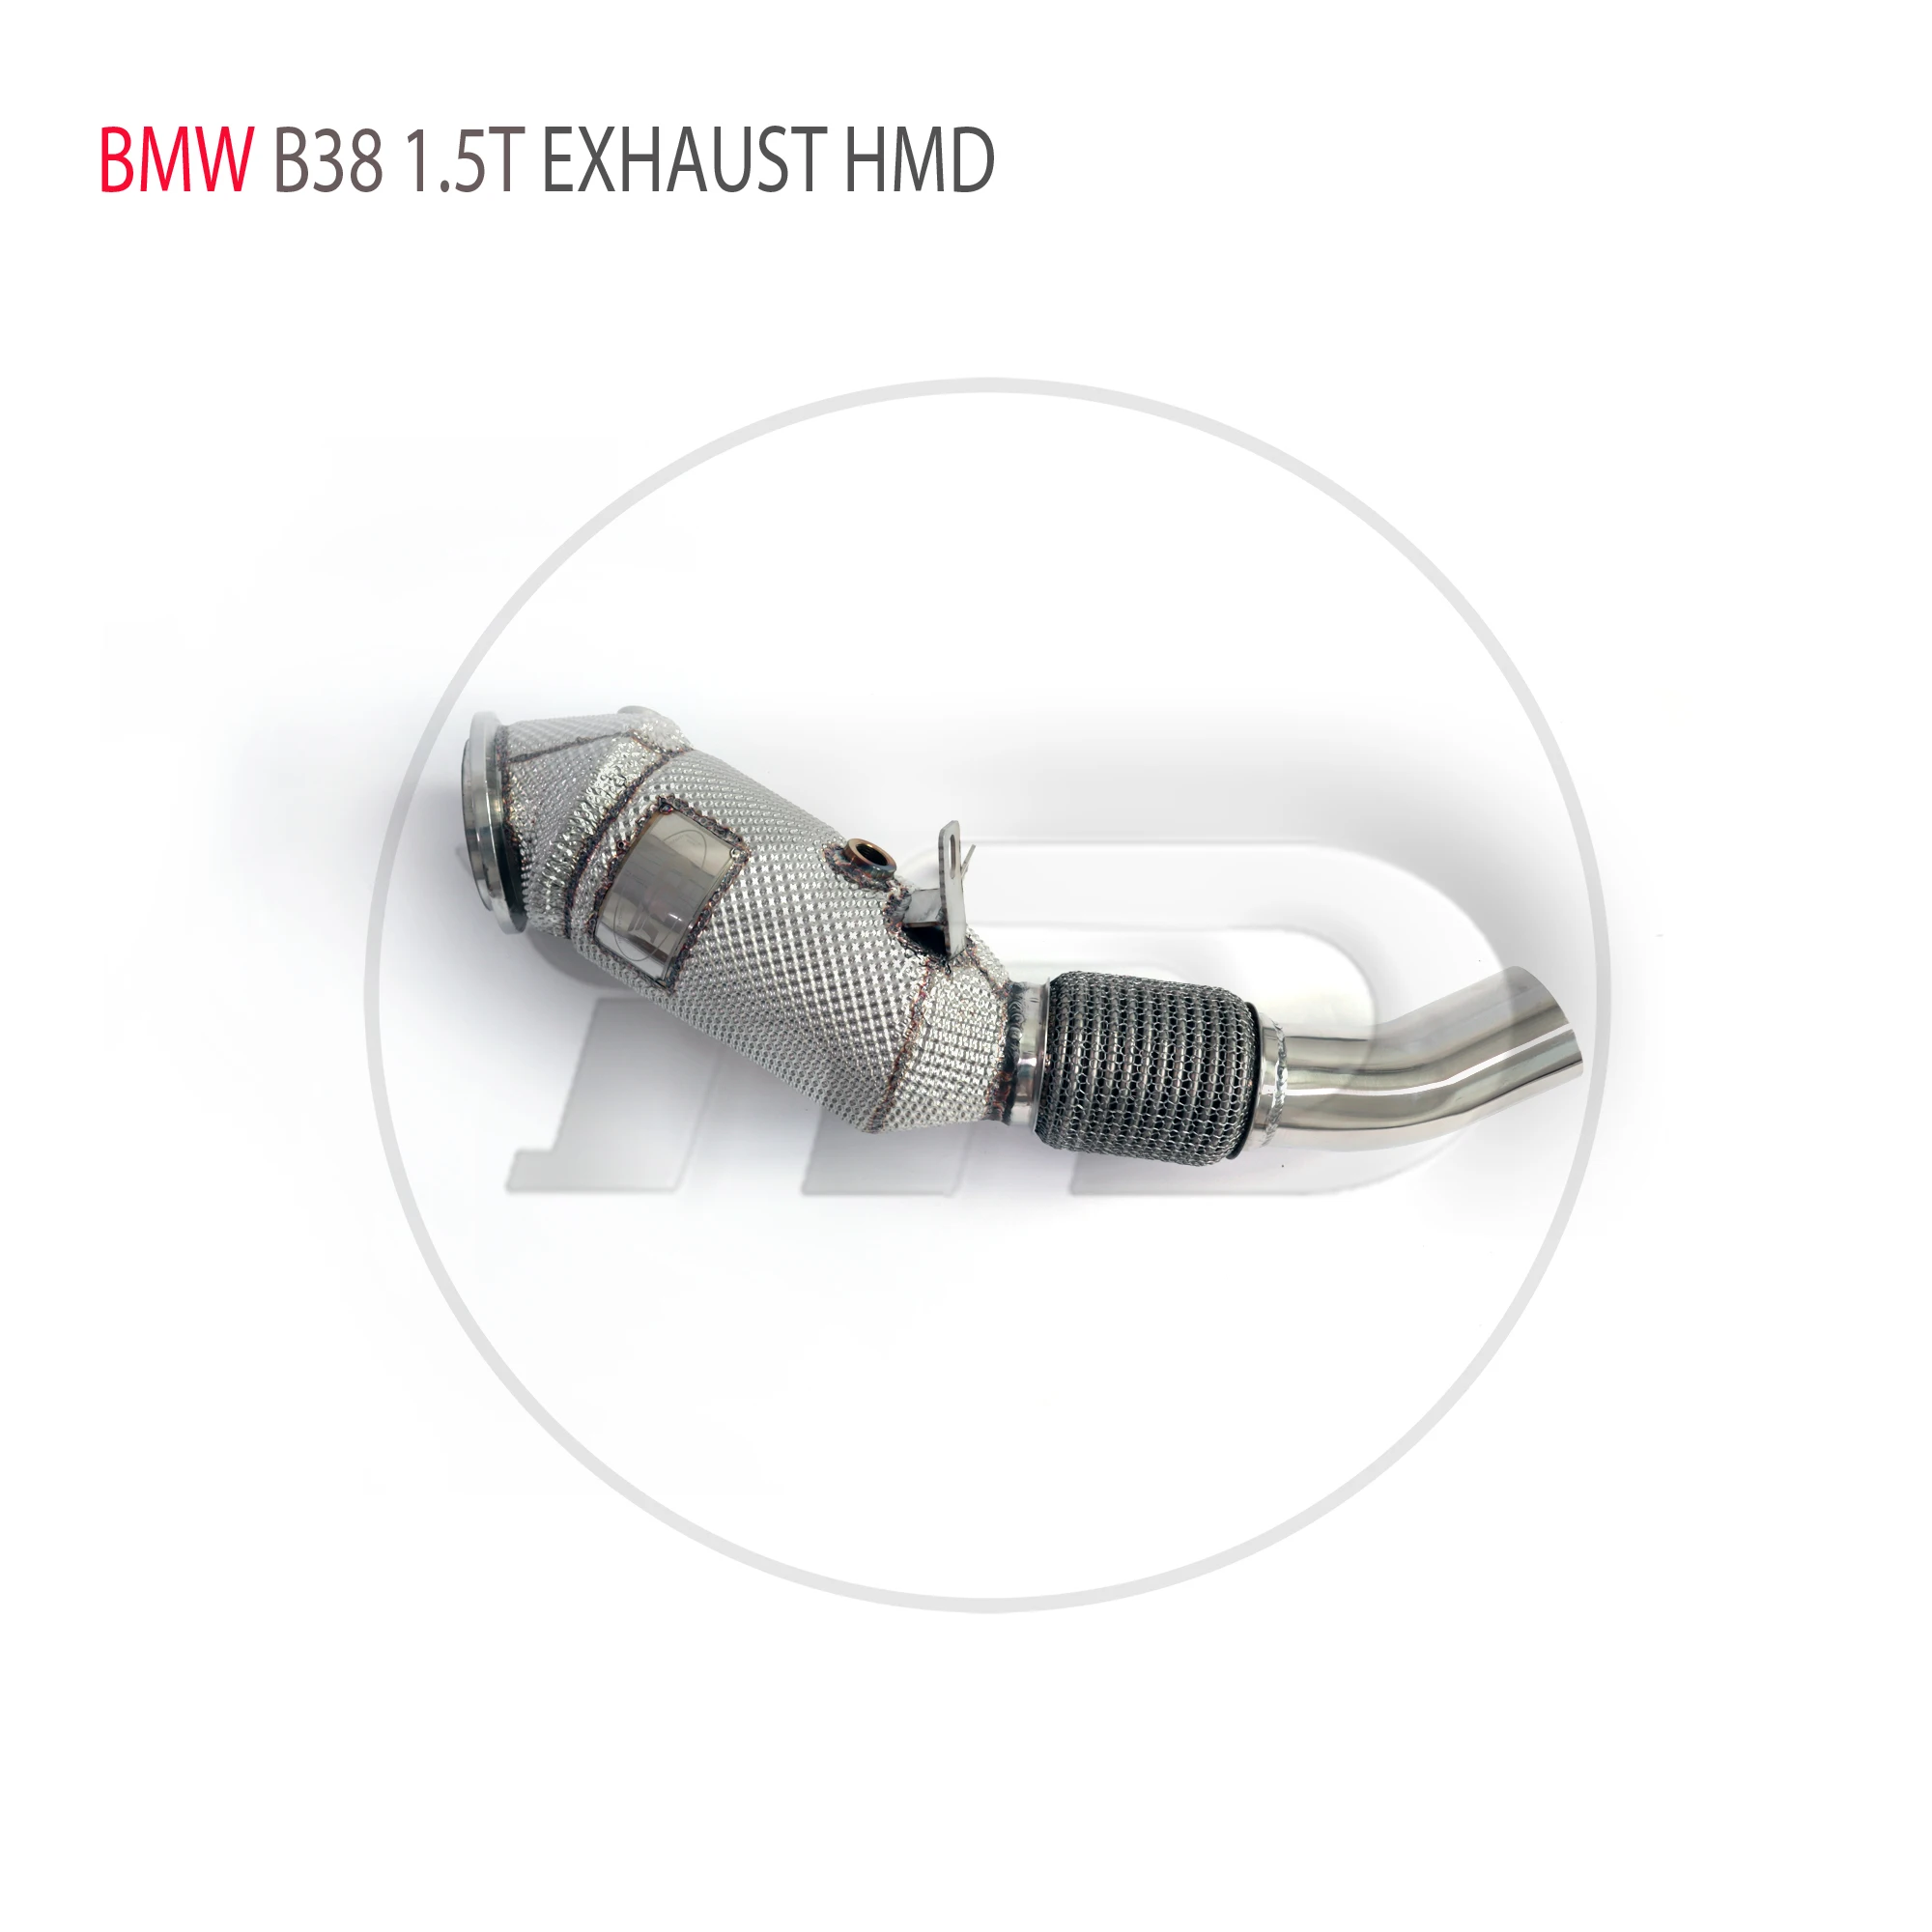 

HMD Exhaust System High Flow Performance Downpipe for BMW 118i F20 B38 Engine 1.5T Catalyst Converter Header